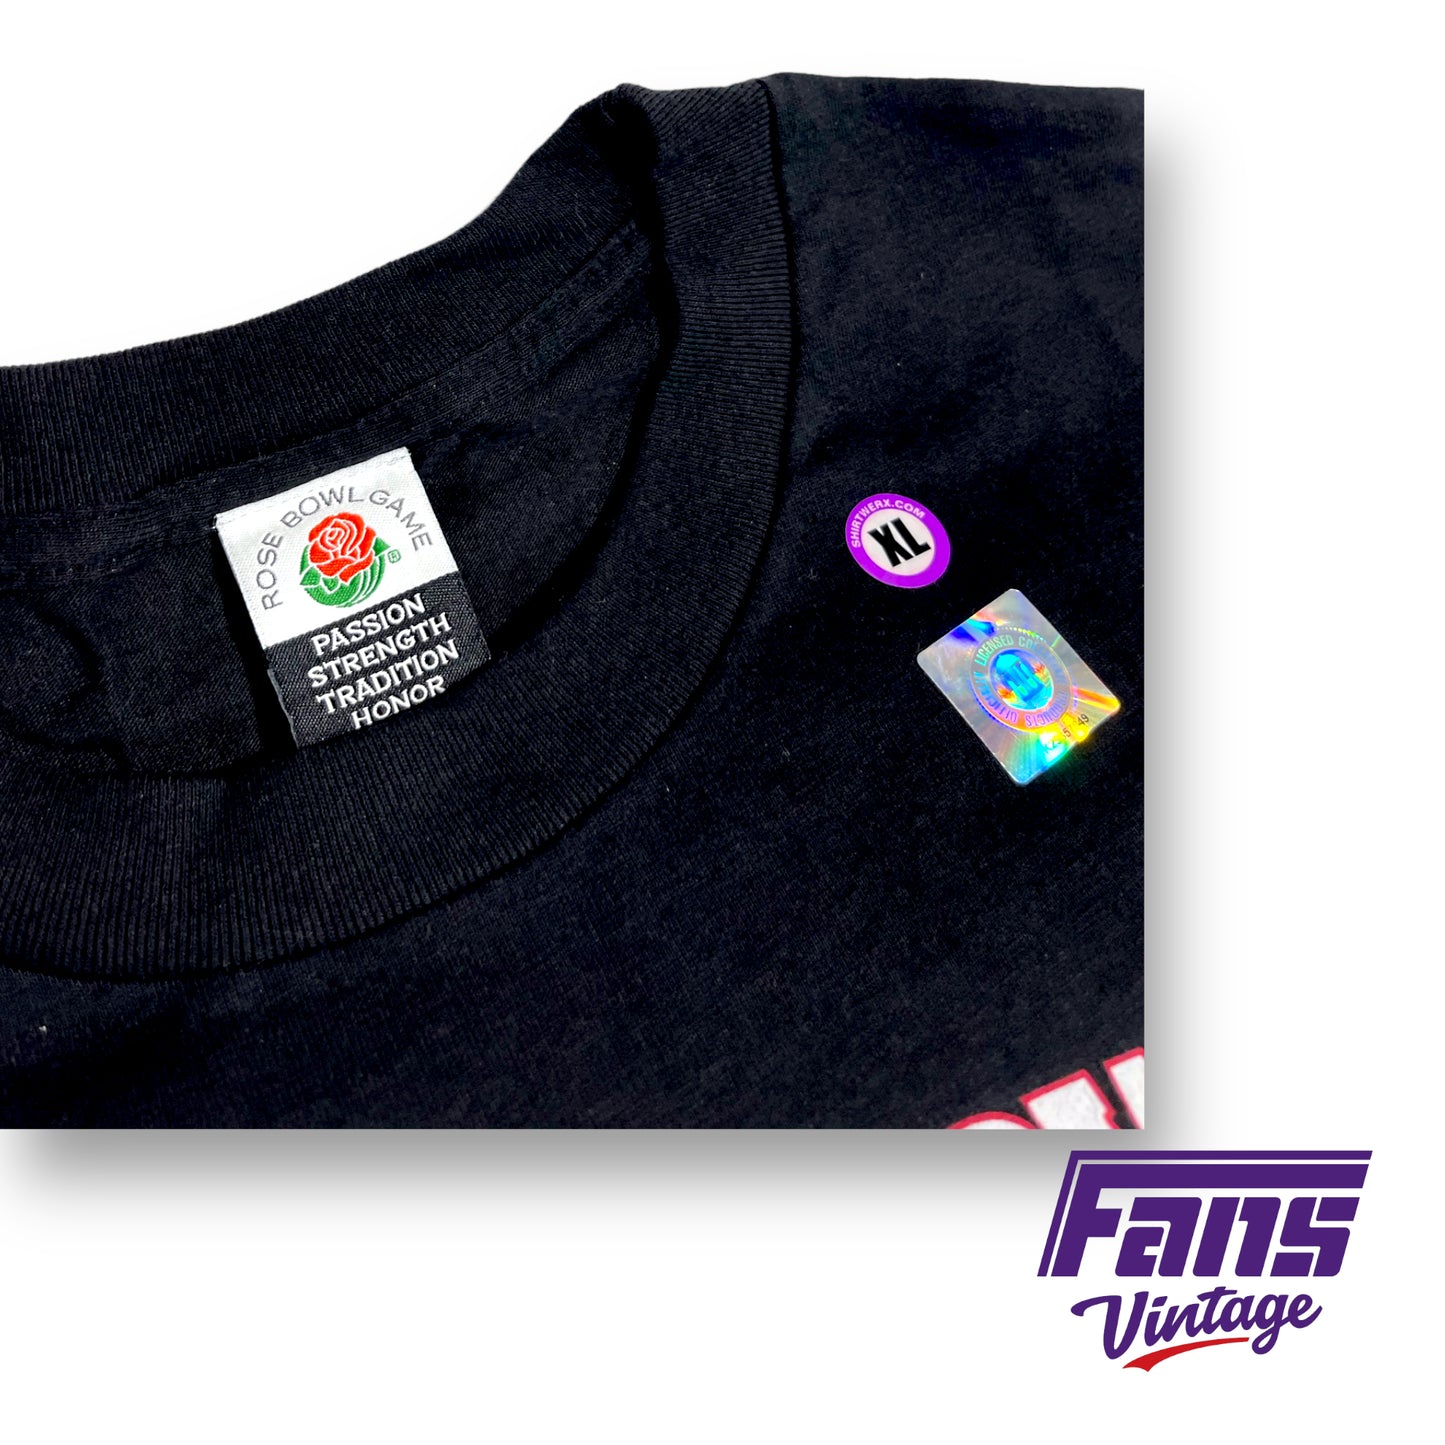 "Grail" 2011 Vintage TCU Rose Bowl Shirt - New with Tags! Double Sided Epic Graphics